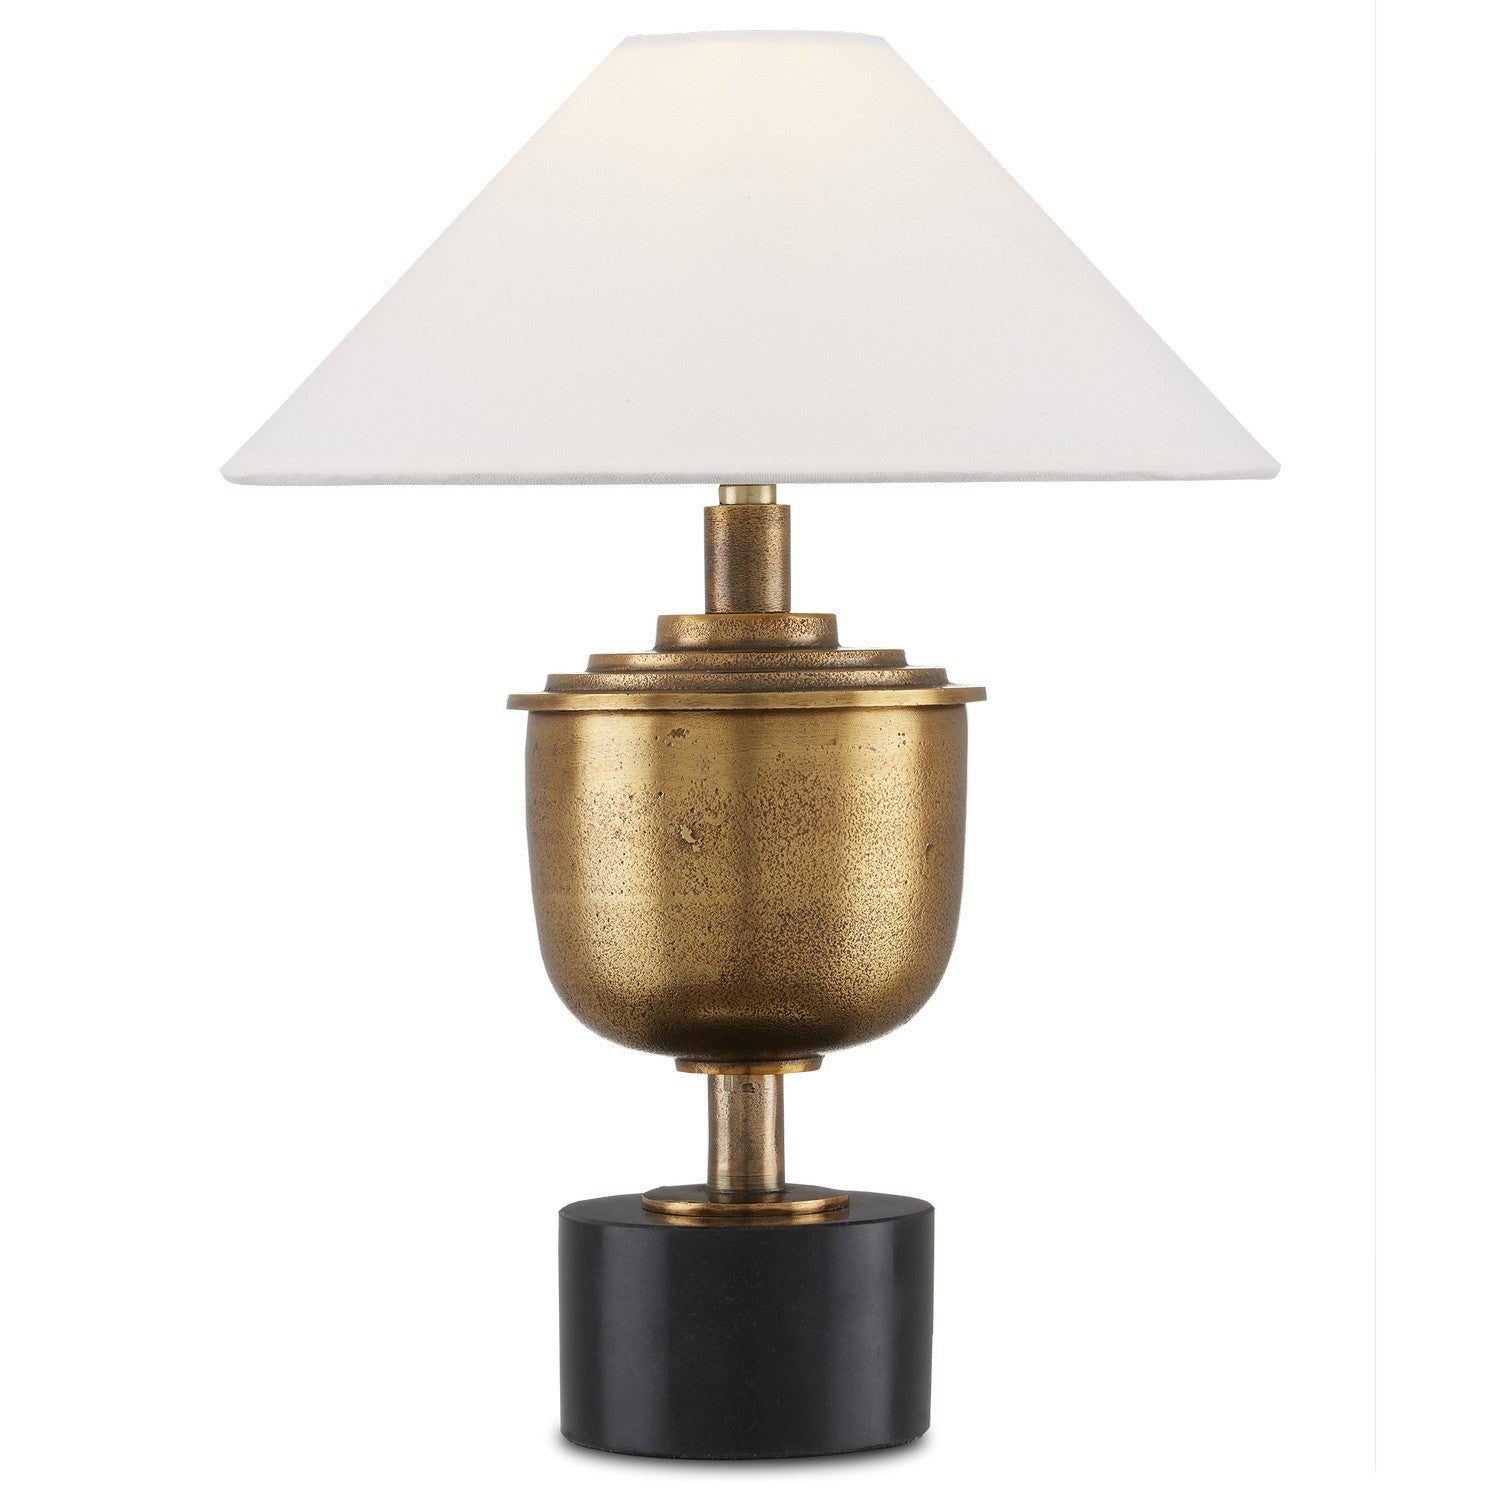 Currey and Company - 6000-0877 - One Light Table Lamp - Antique Brass/Black